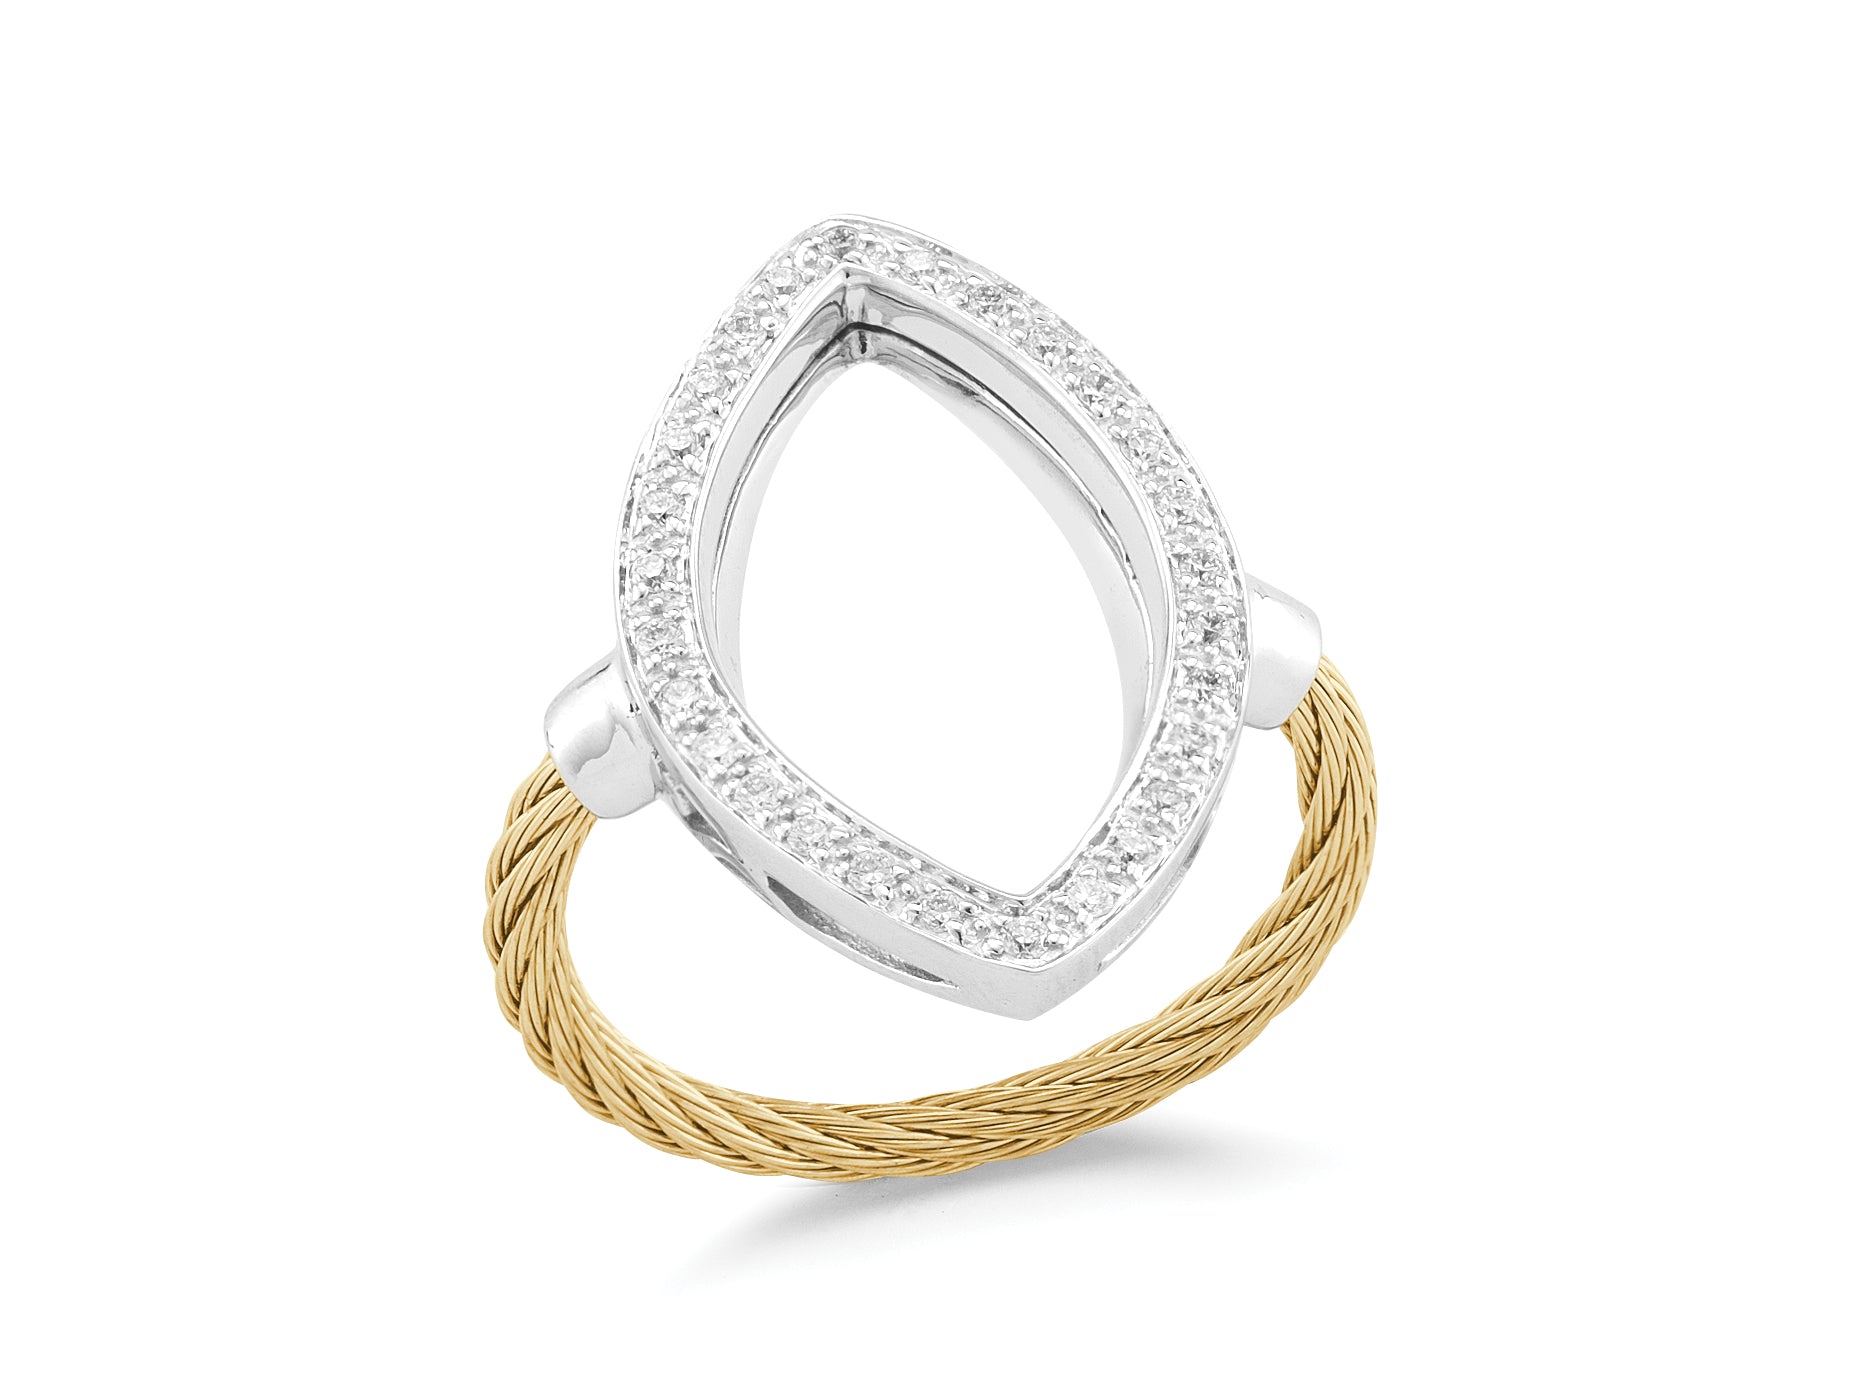 Alor Yellow cable, 18 karat White Gold, 0.23 total carat weight Diamonds with stainless steel. Imported.